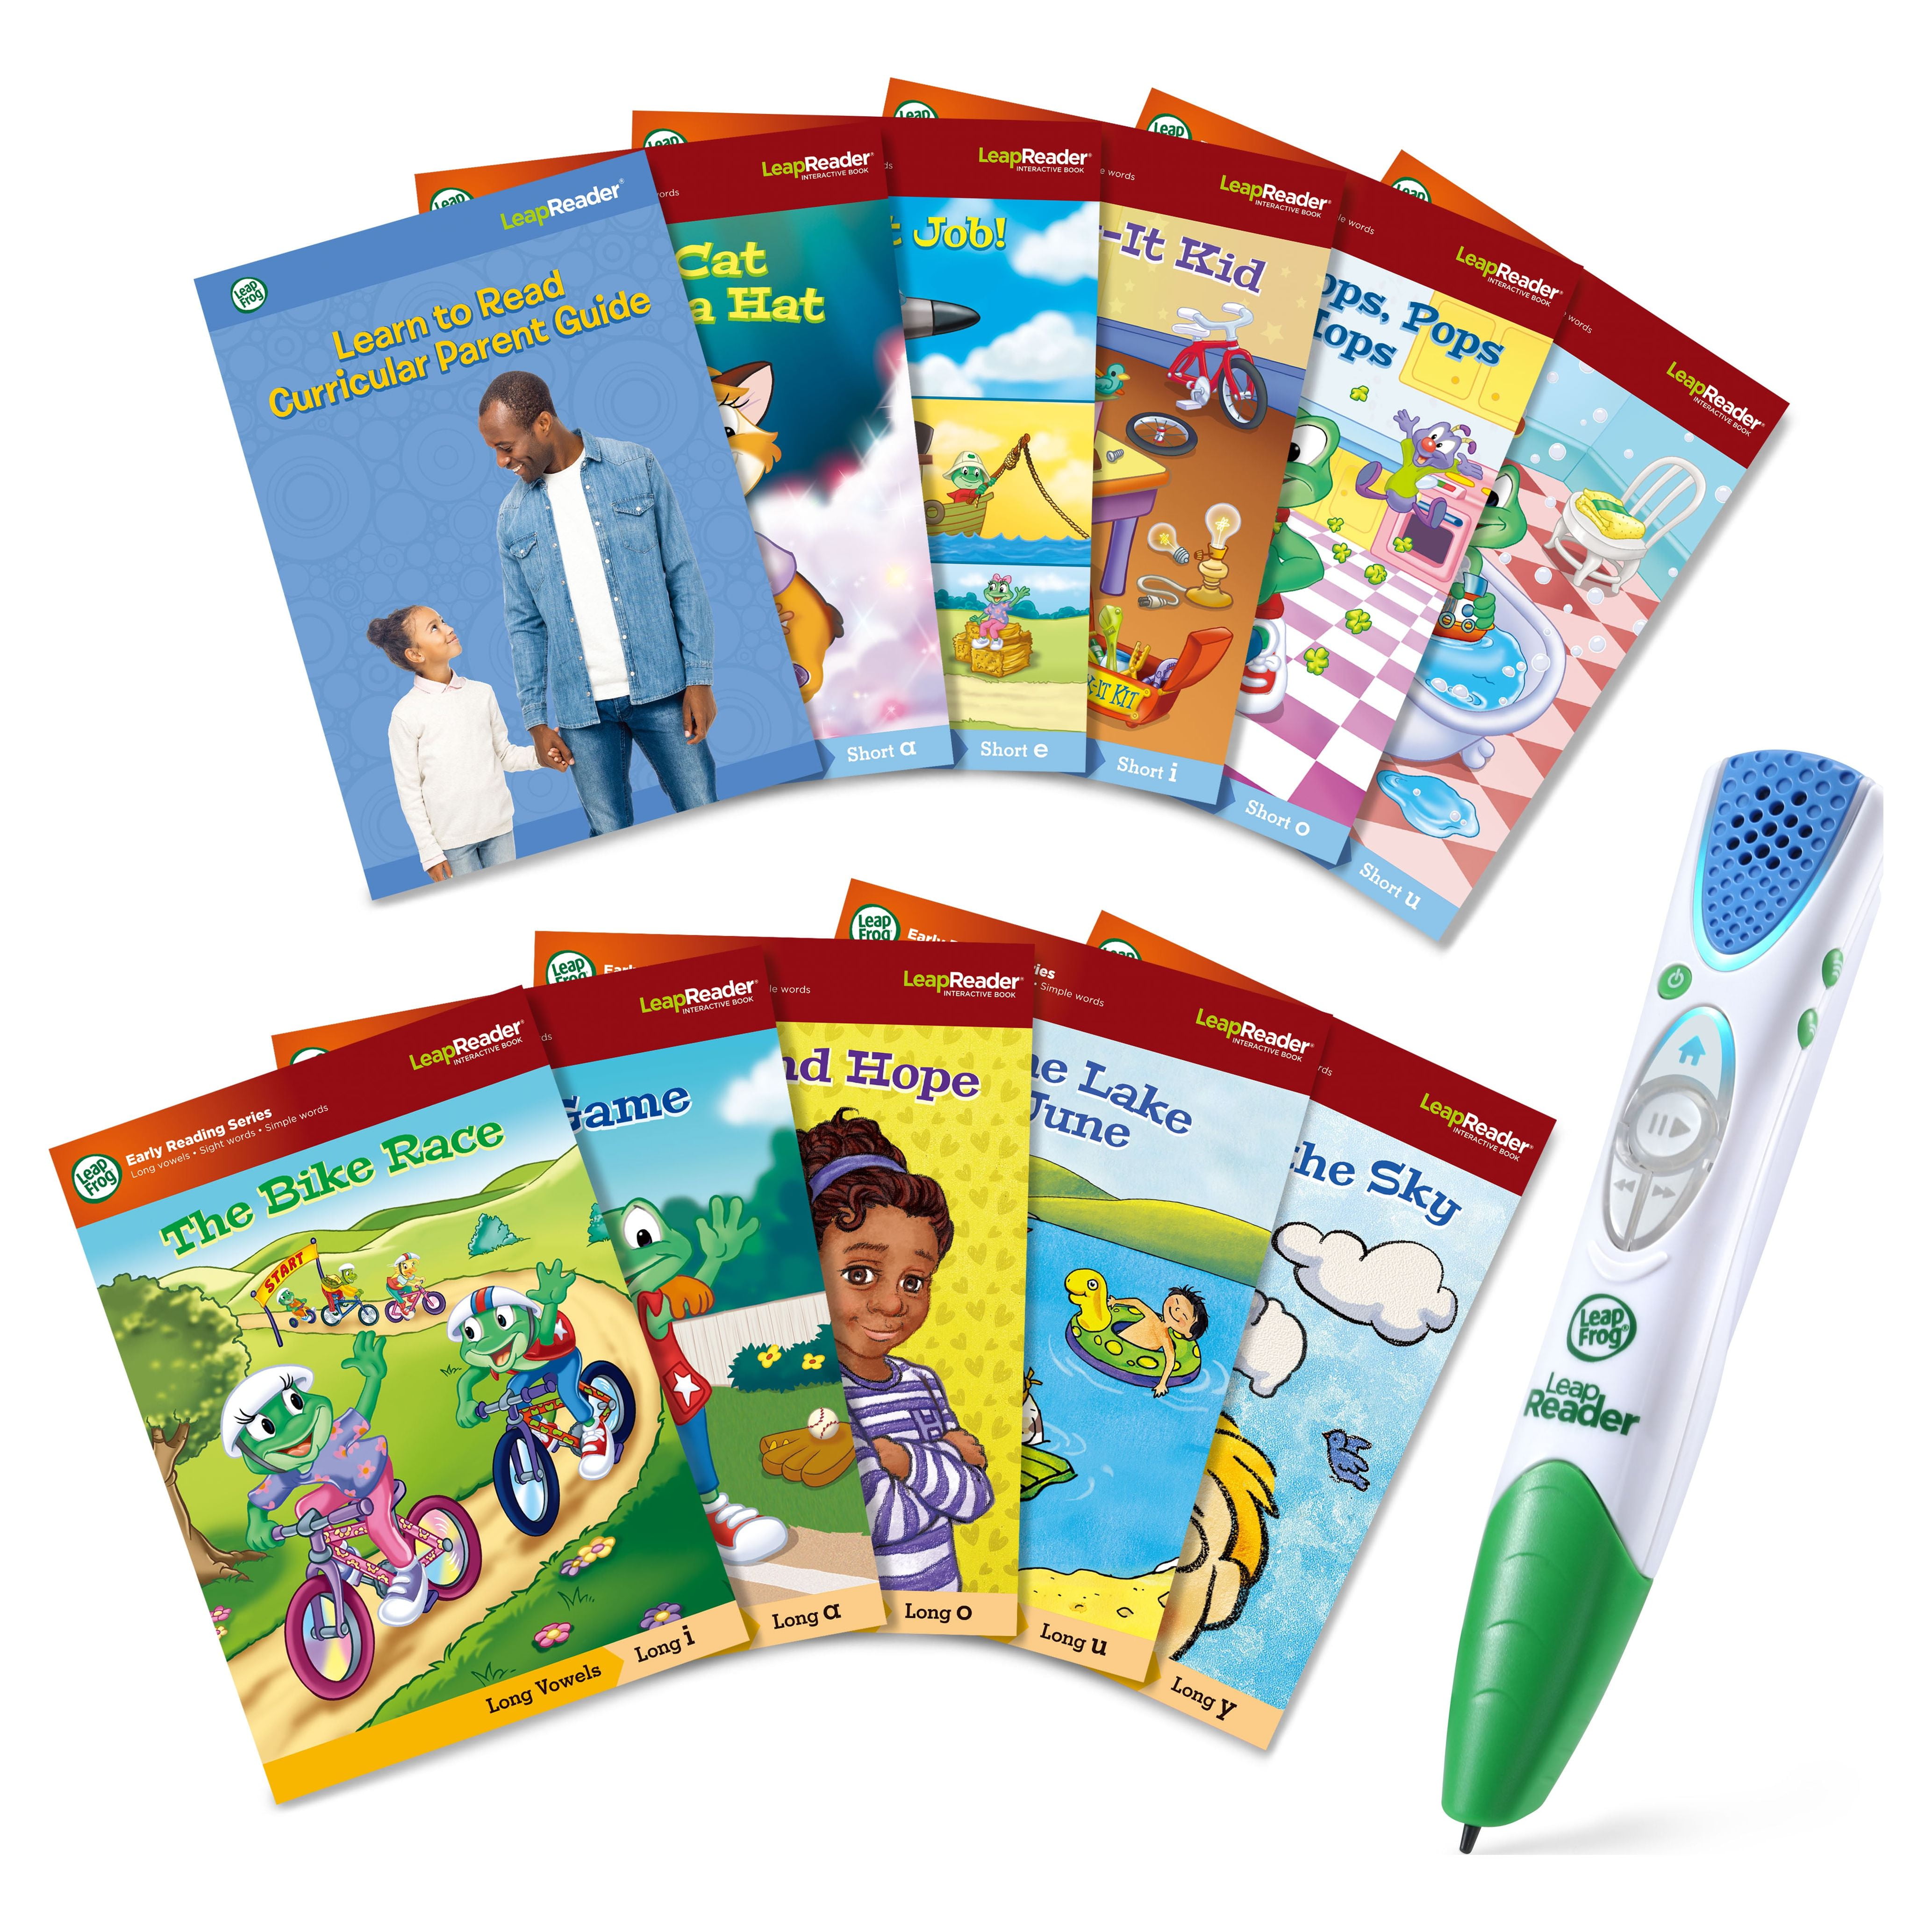 Learn-to-Read　Kids　Pack,　10-Book　Mega　LeapReader　Included,　for　Reading　Toy　LeapFrog　Stylus